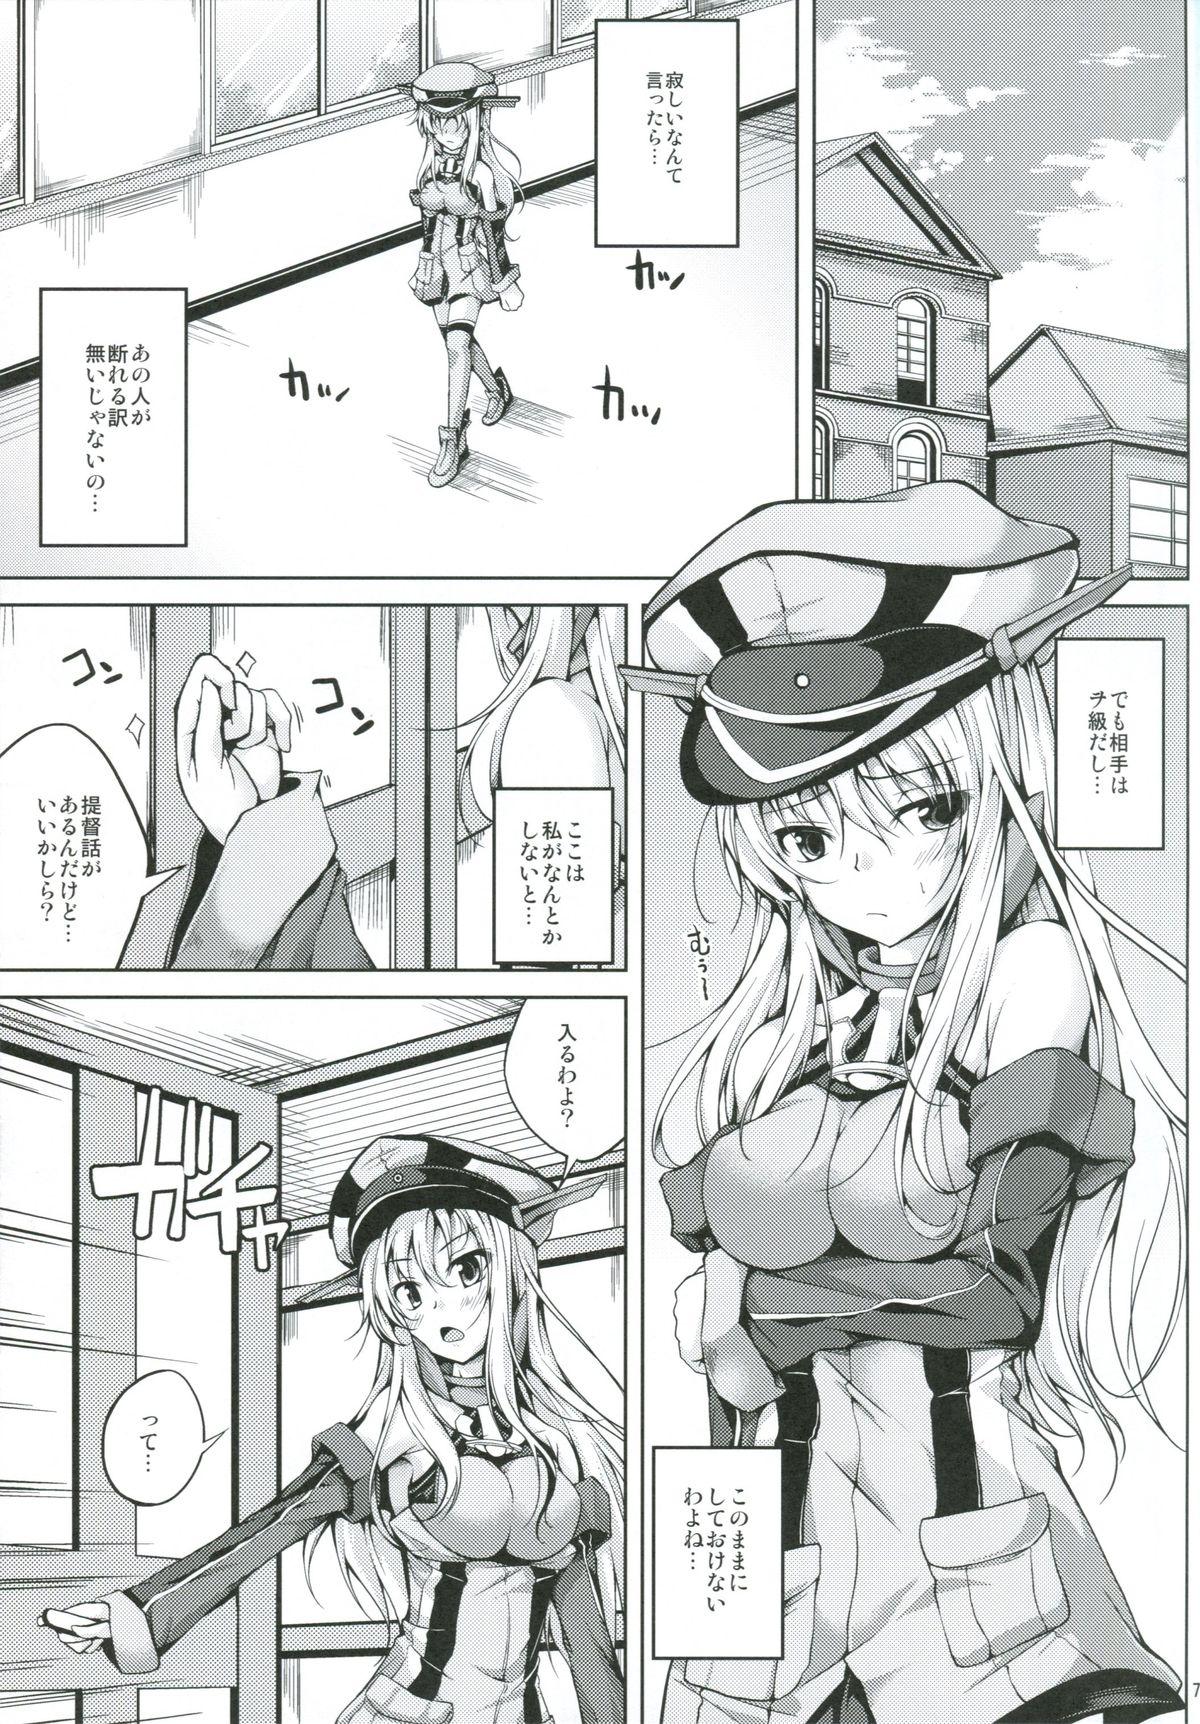 Best Blowjobs Koiiro Moyou 7 - Kantai collection Amateur Sex - Page 6